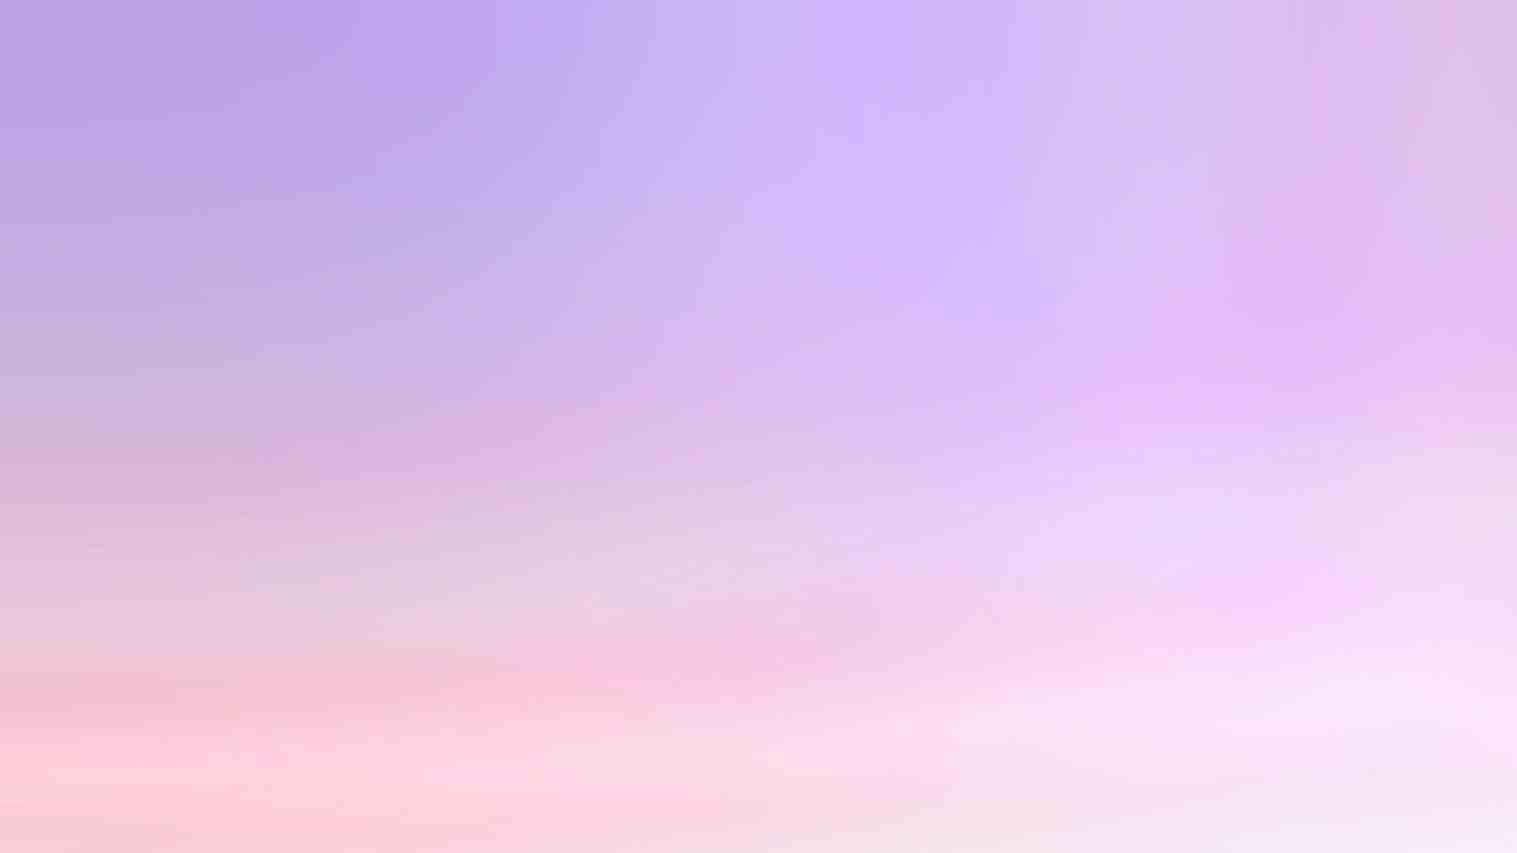 A Solid Light Purple Background Wallpaper